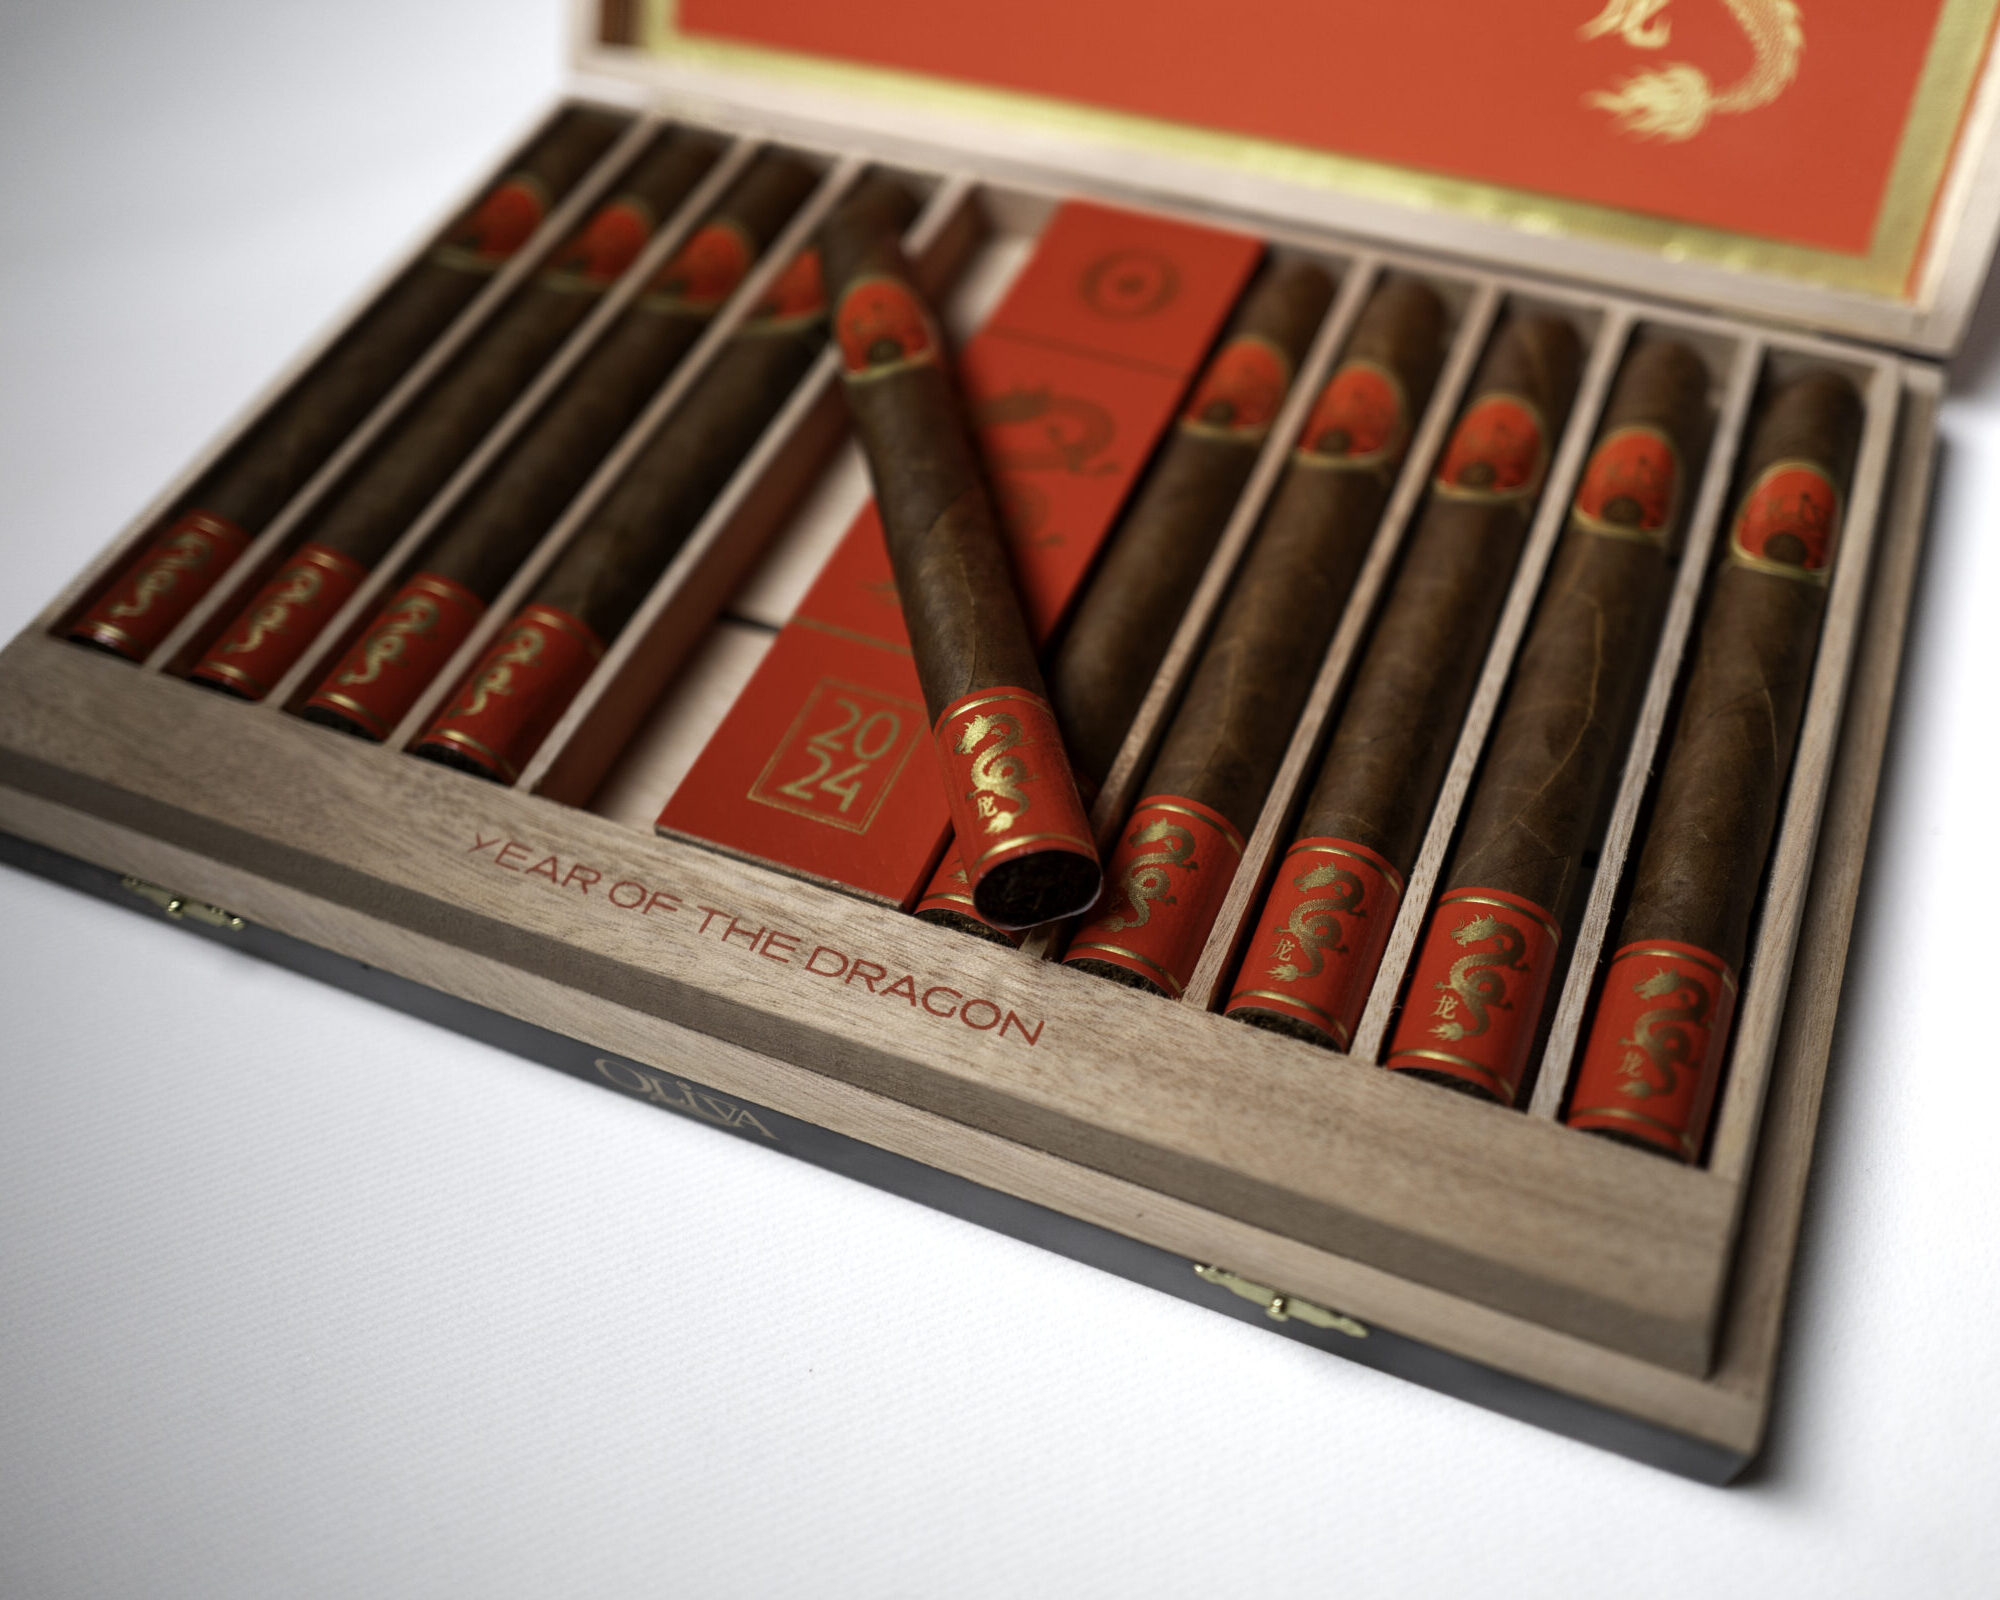 Oliva Launches Year of the Dragon Churchill Cigar Exclusive to China Duty Free